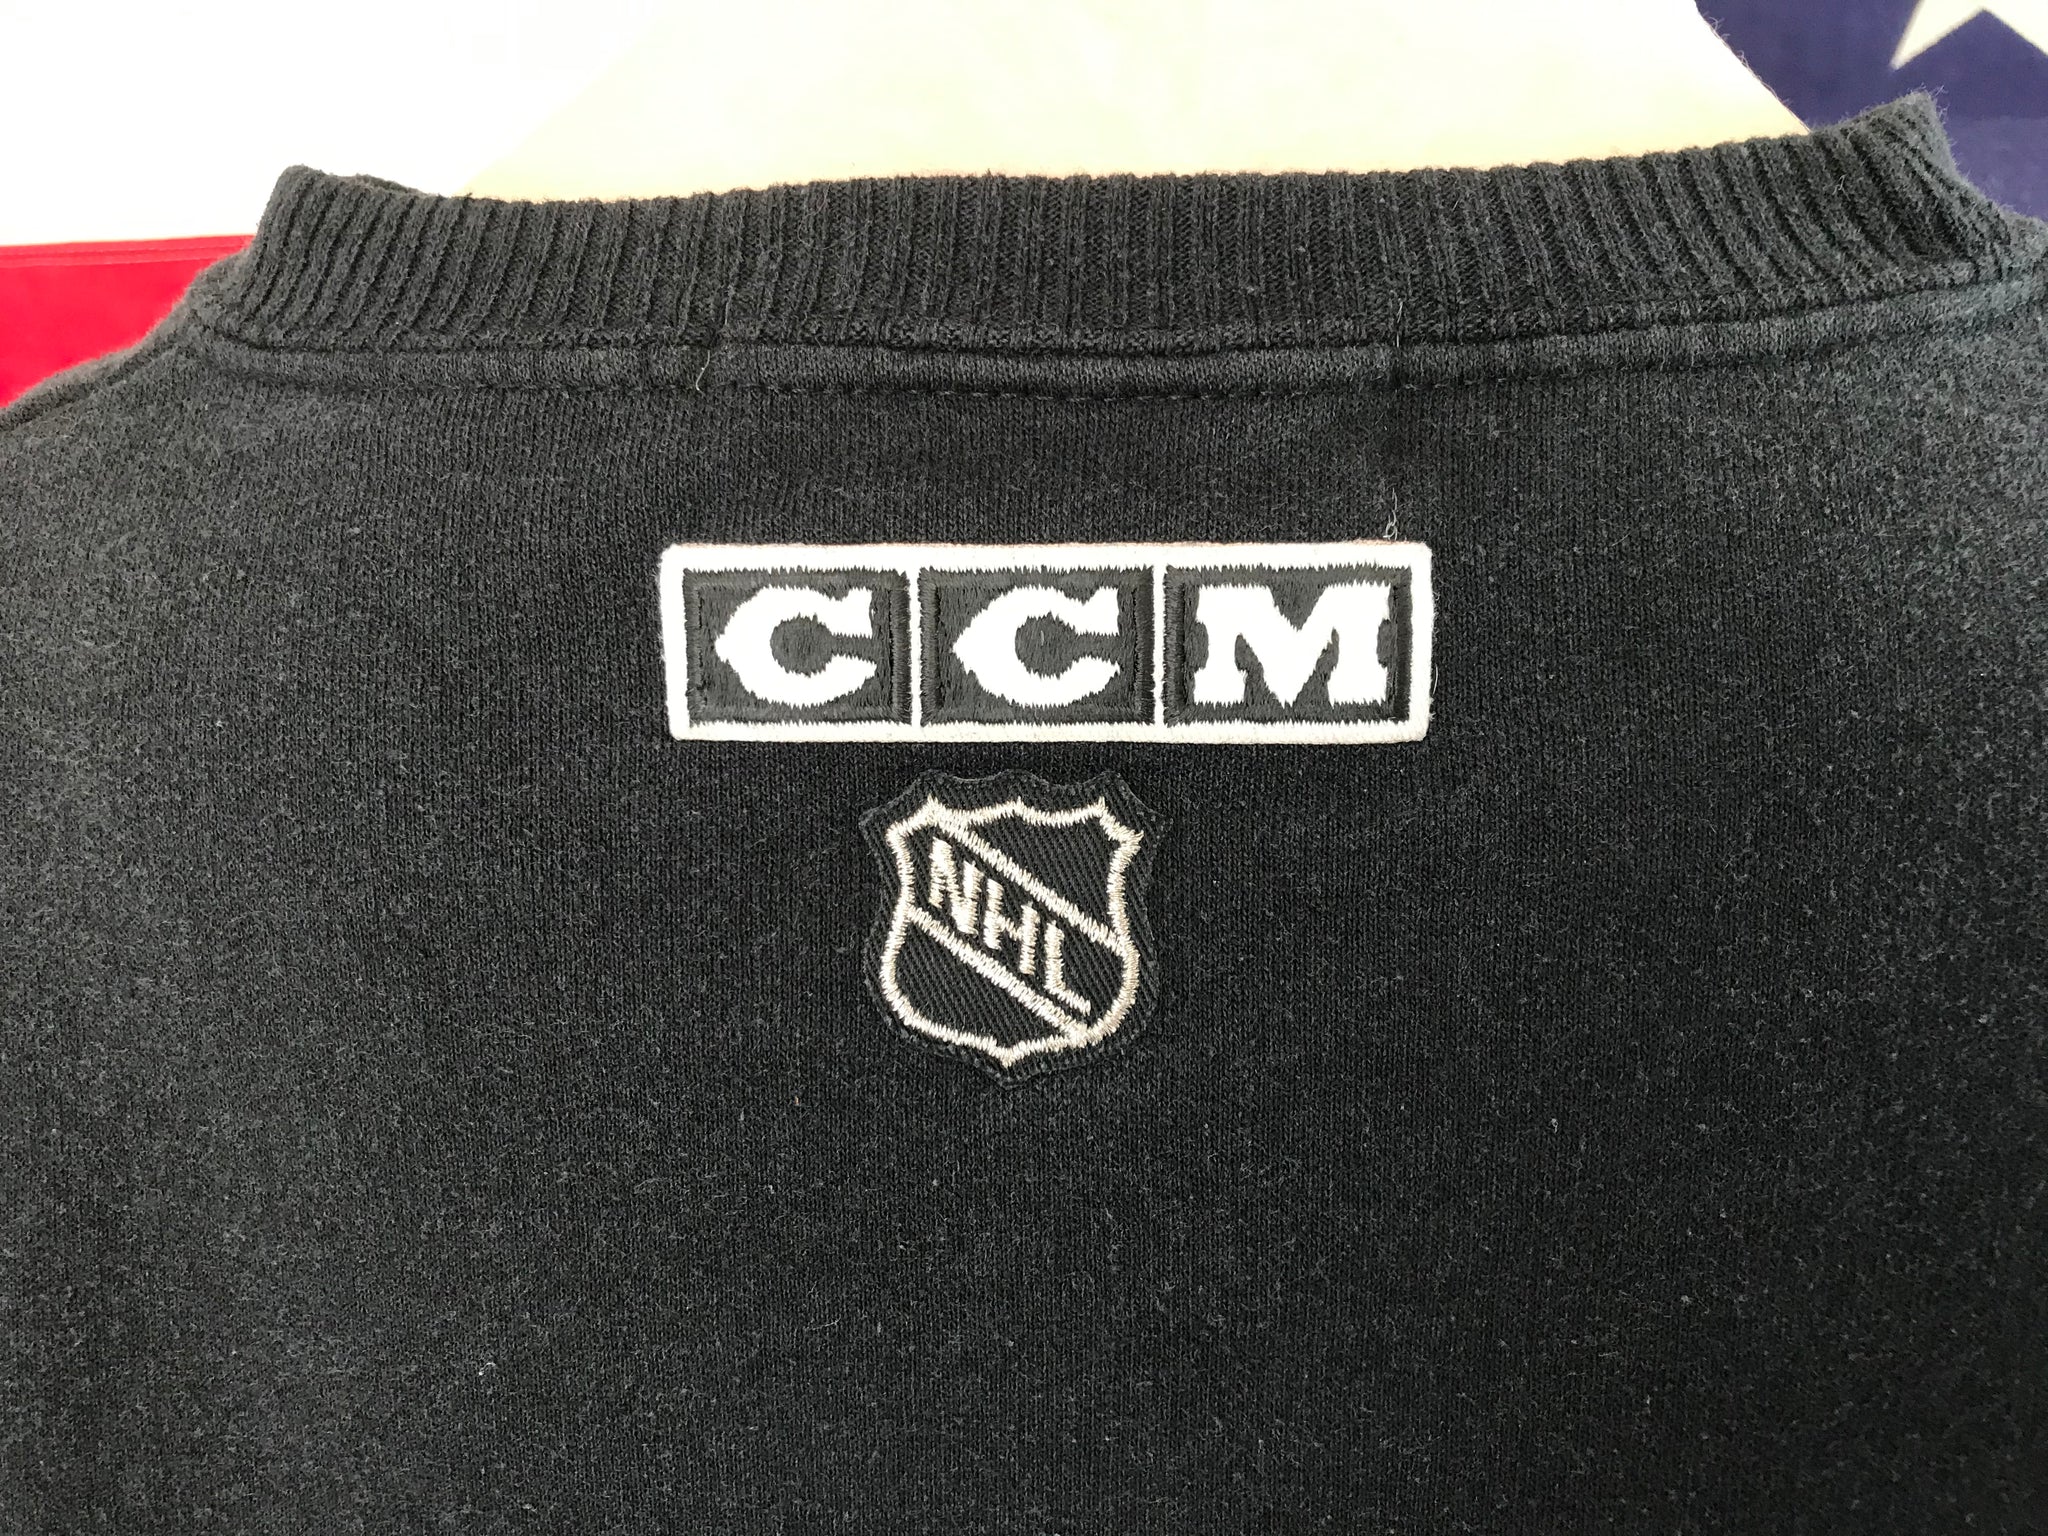 Dallas Stars NHL Ice Hockey Vintage Crew Sporting Sweat by CCM Made in Canada